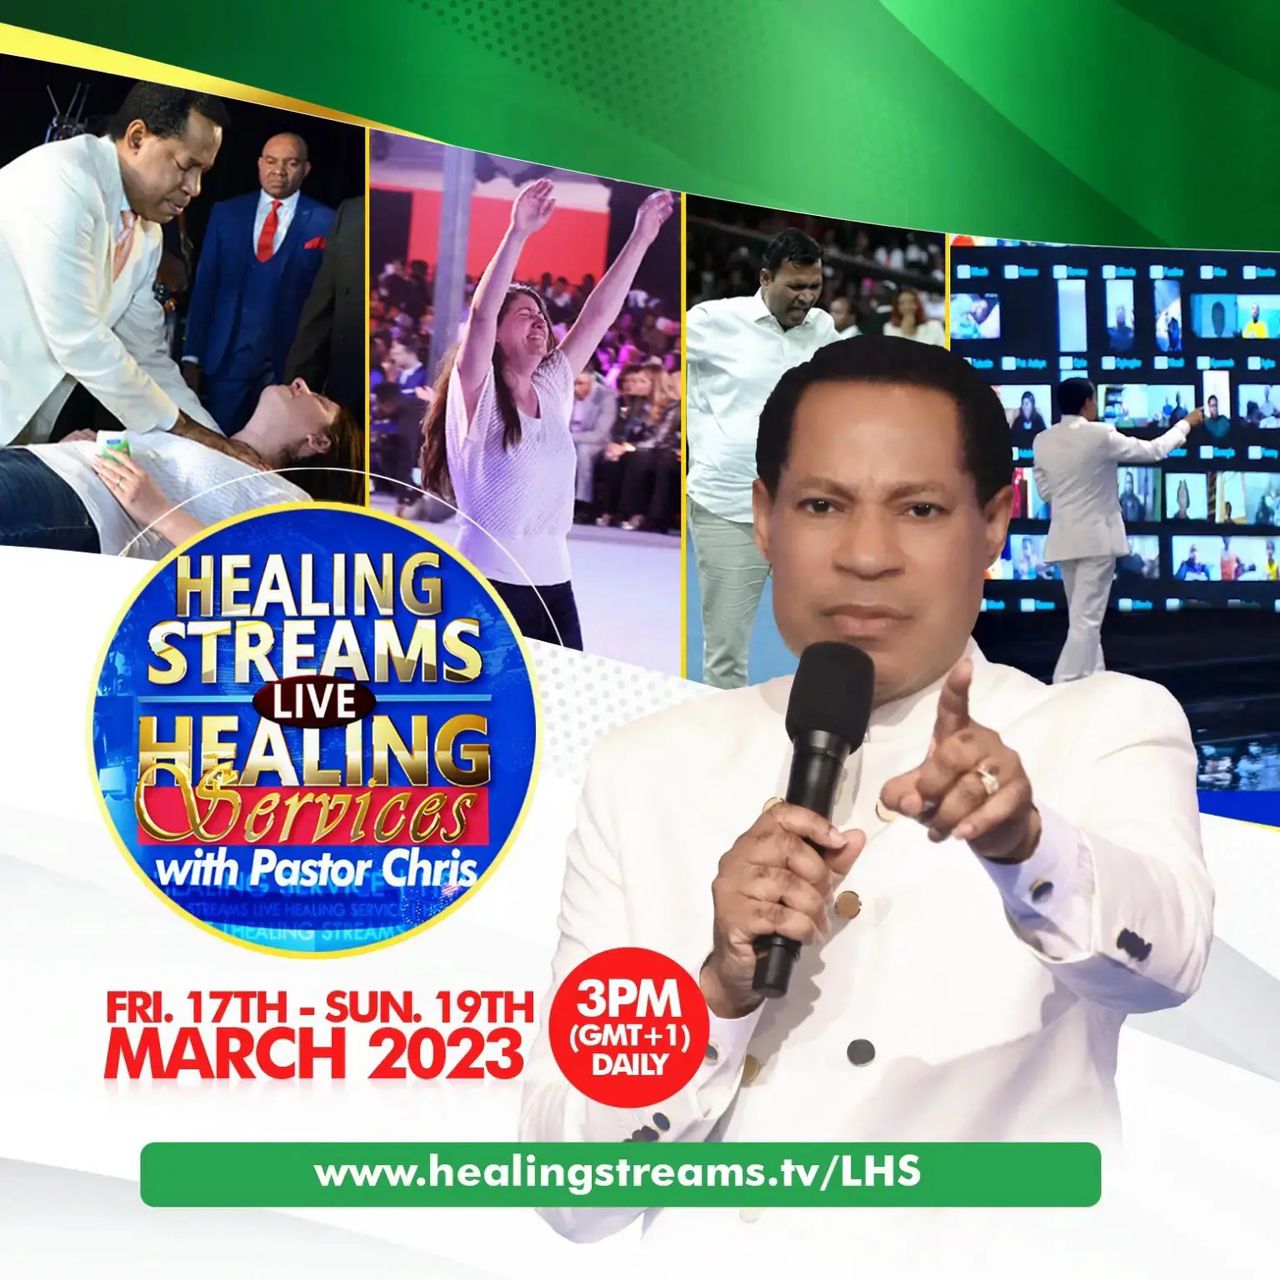 It’s Another Session Of Miracles At The March 2023 Healing Streams Services With Pastor Chris